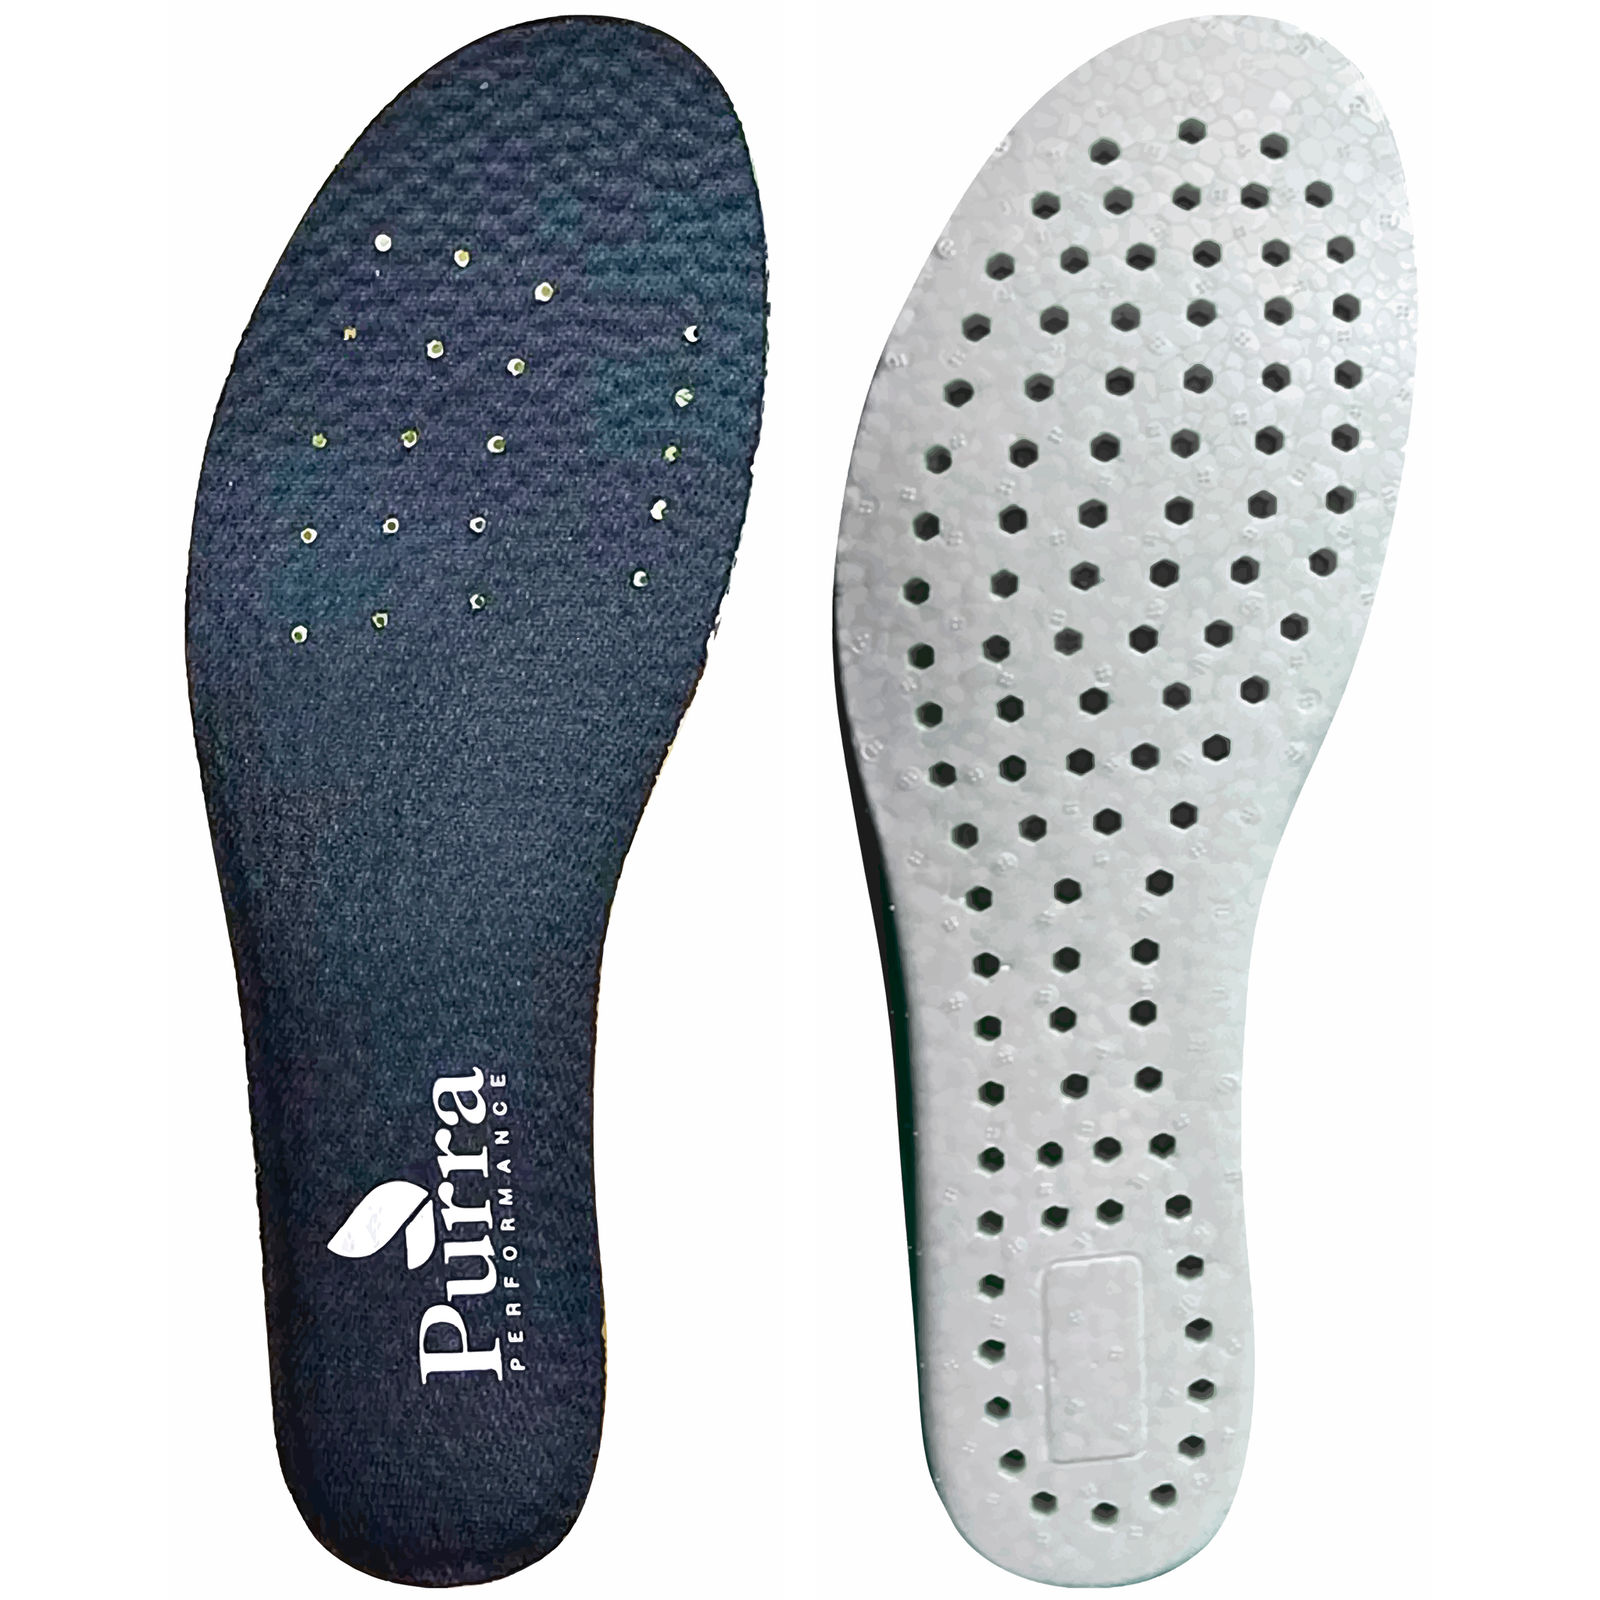 This shows the antimicrobial ETPE insole both the navy blue upper and the lower white sole with the holes for air flow like. 